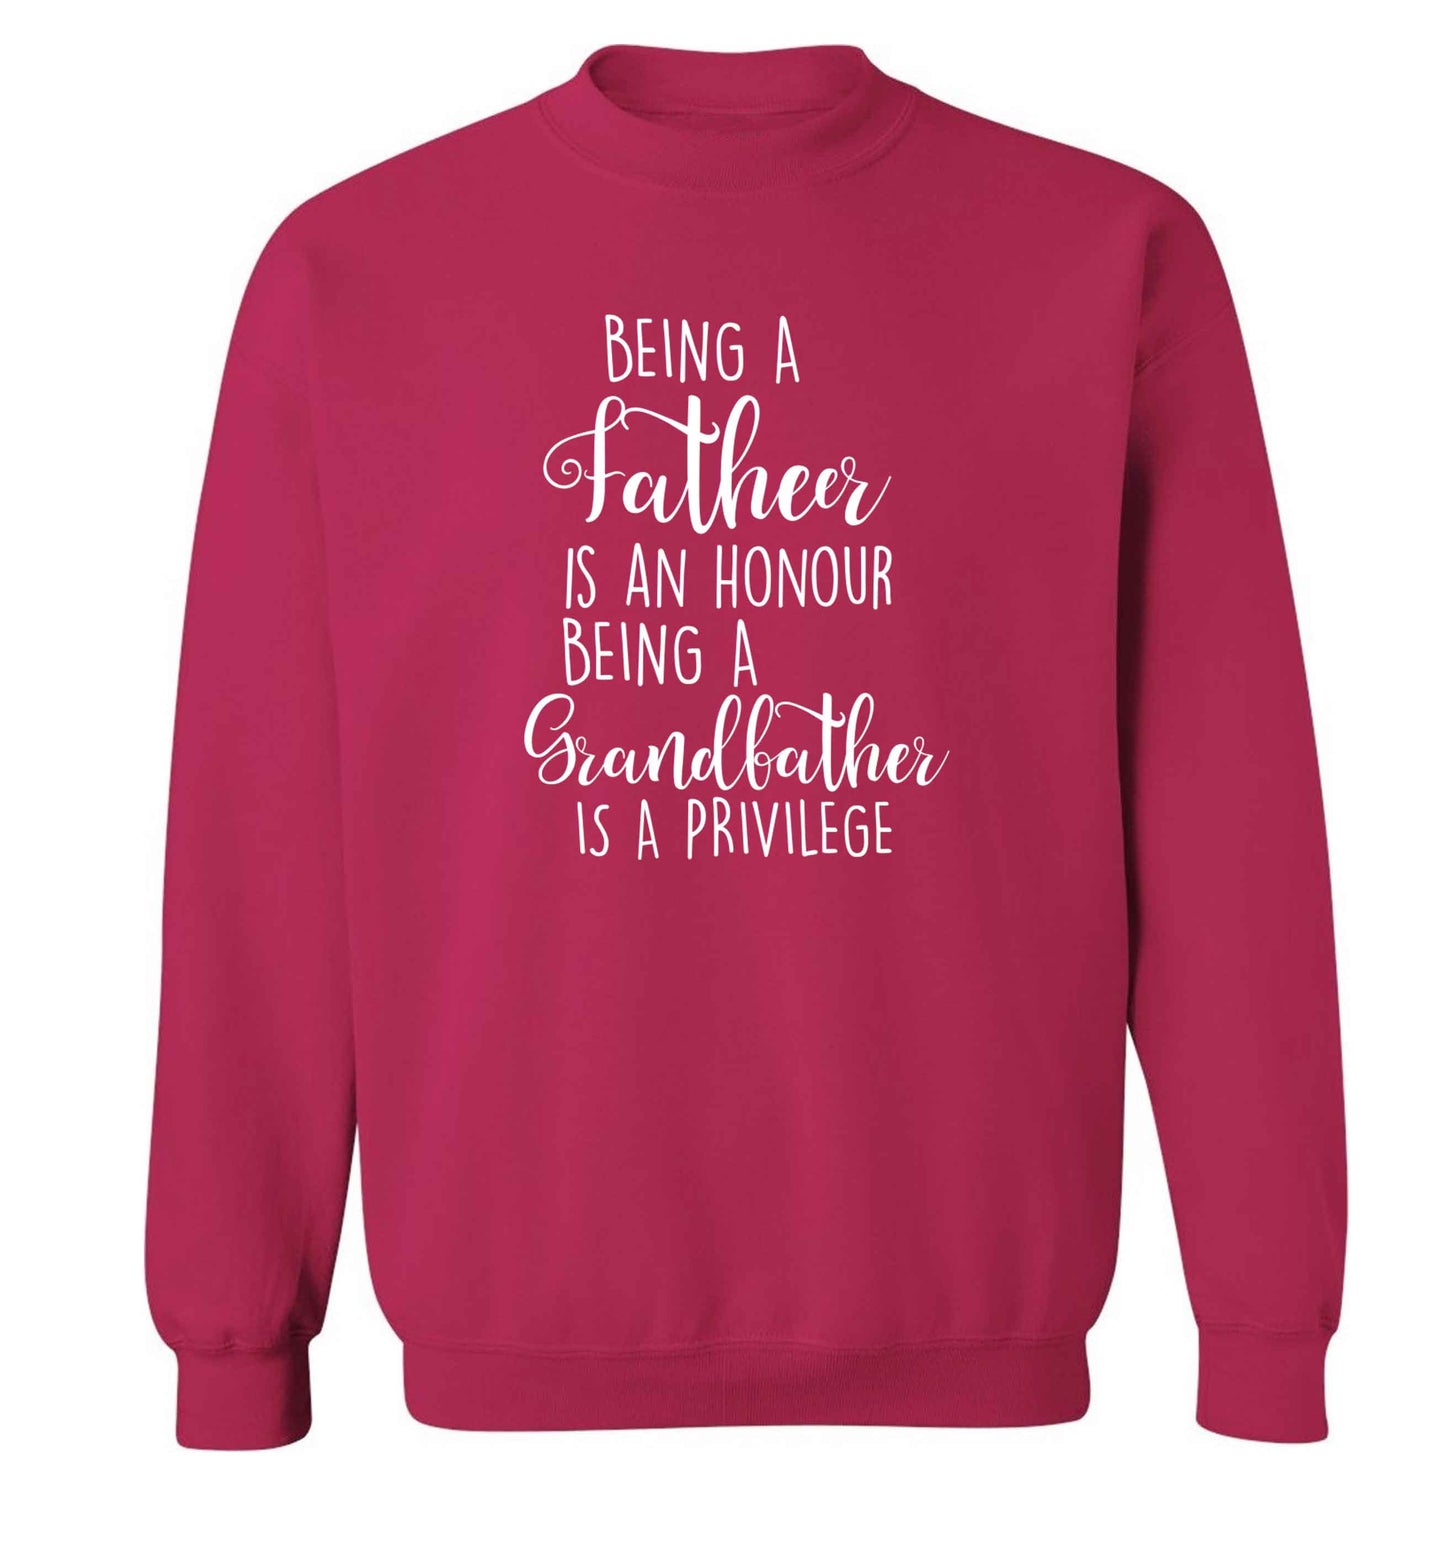 Being a father is an honour being a grandfather is a privilege Adult's unisex pink Sweater 2XL